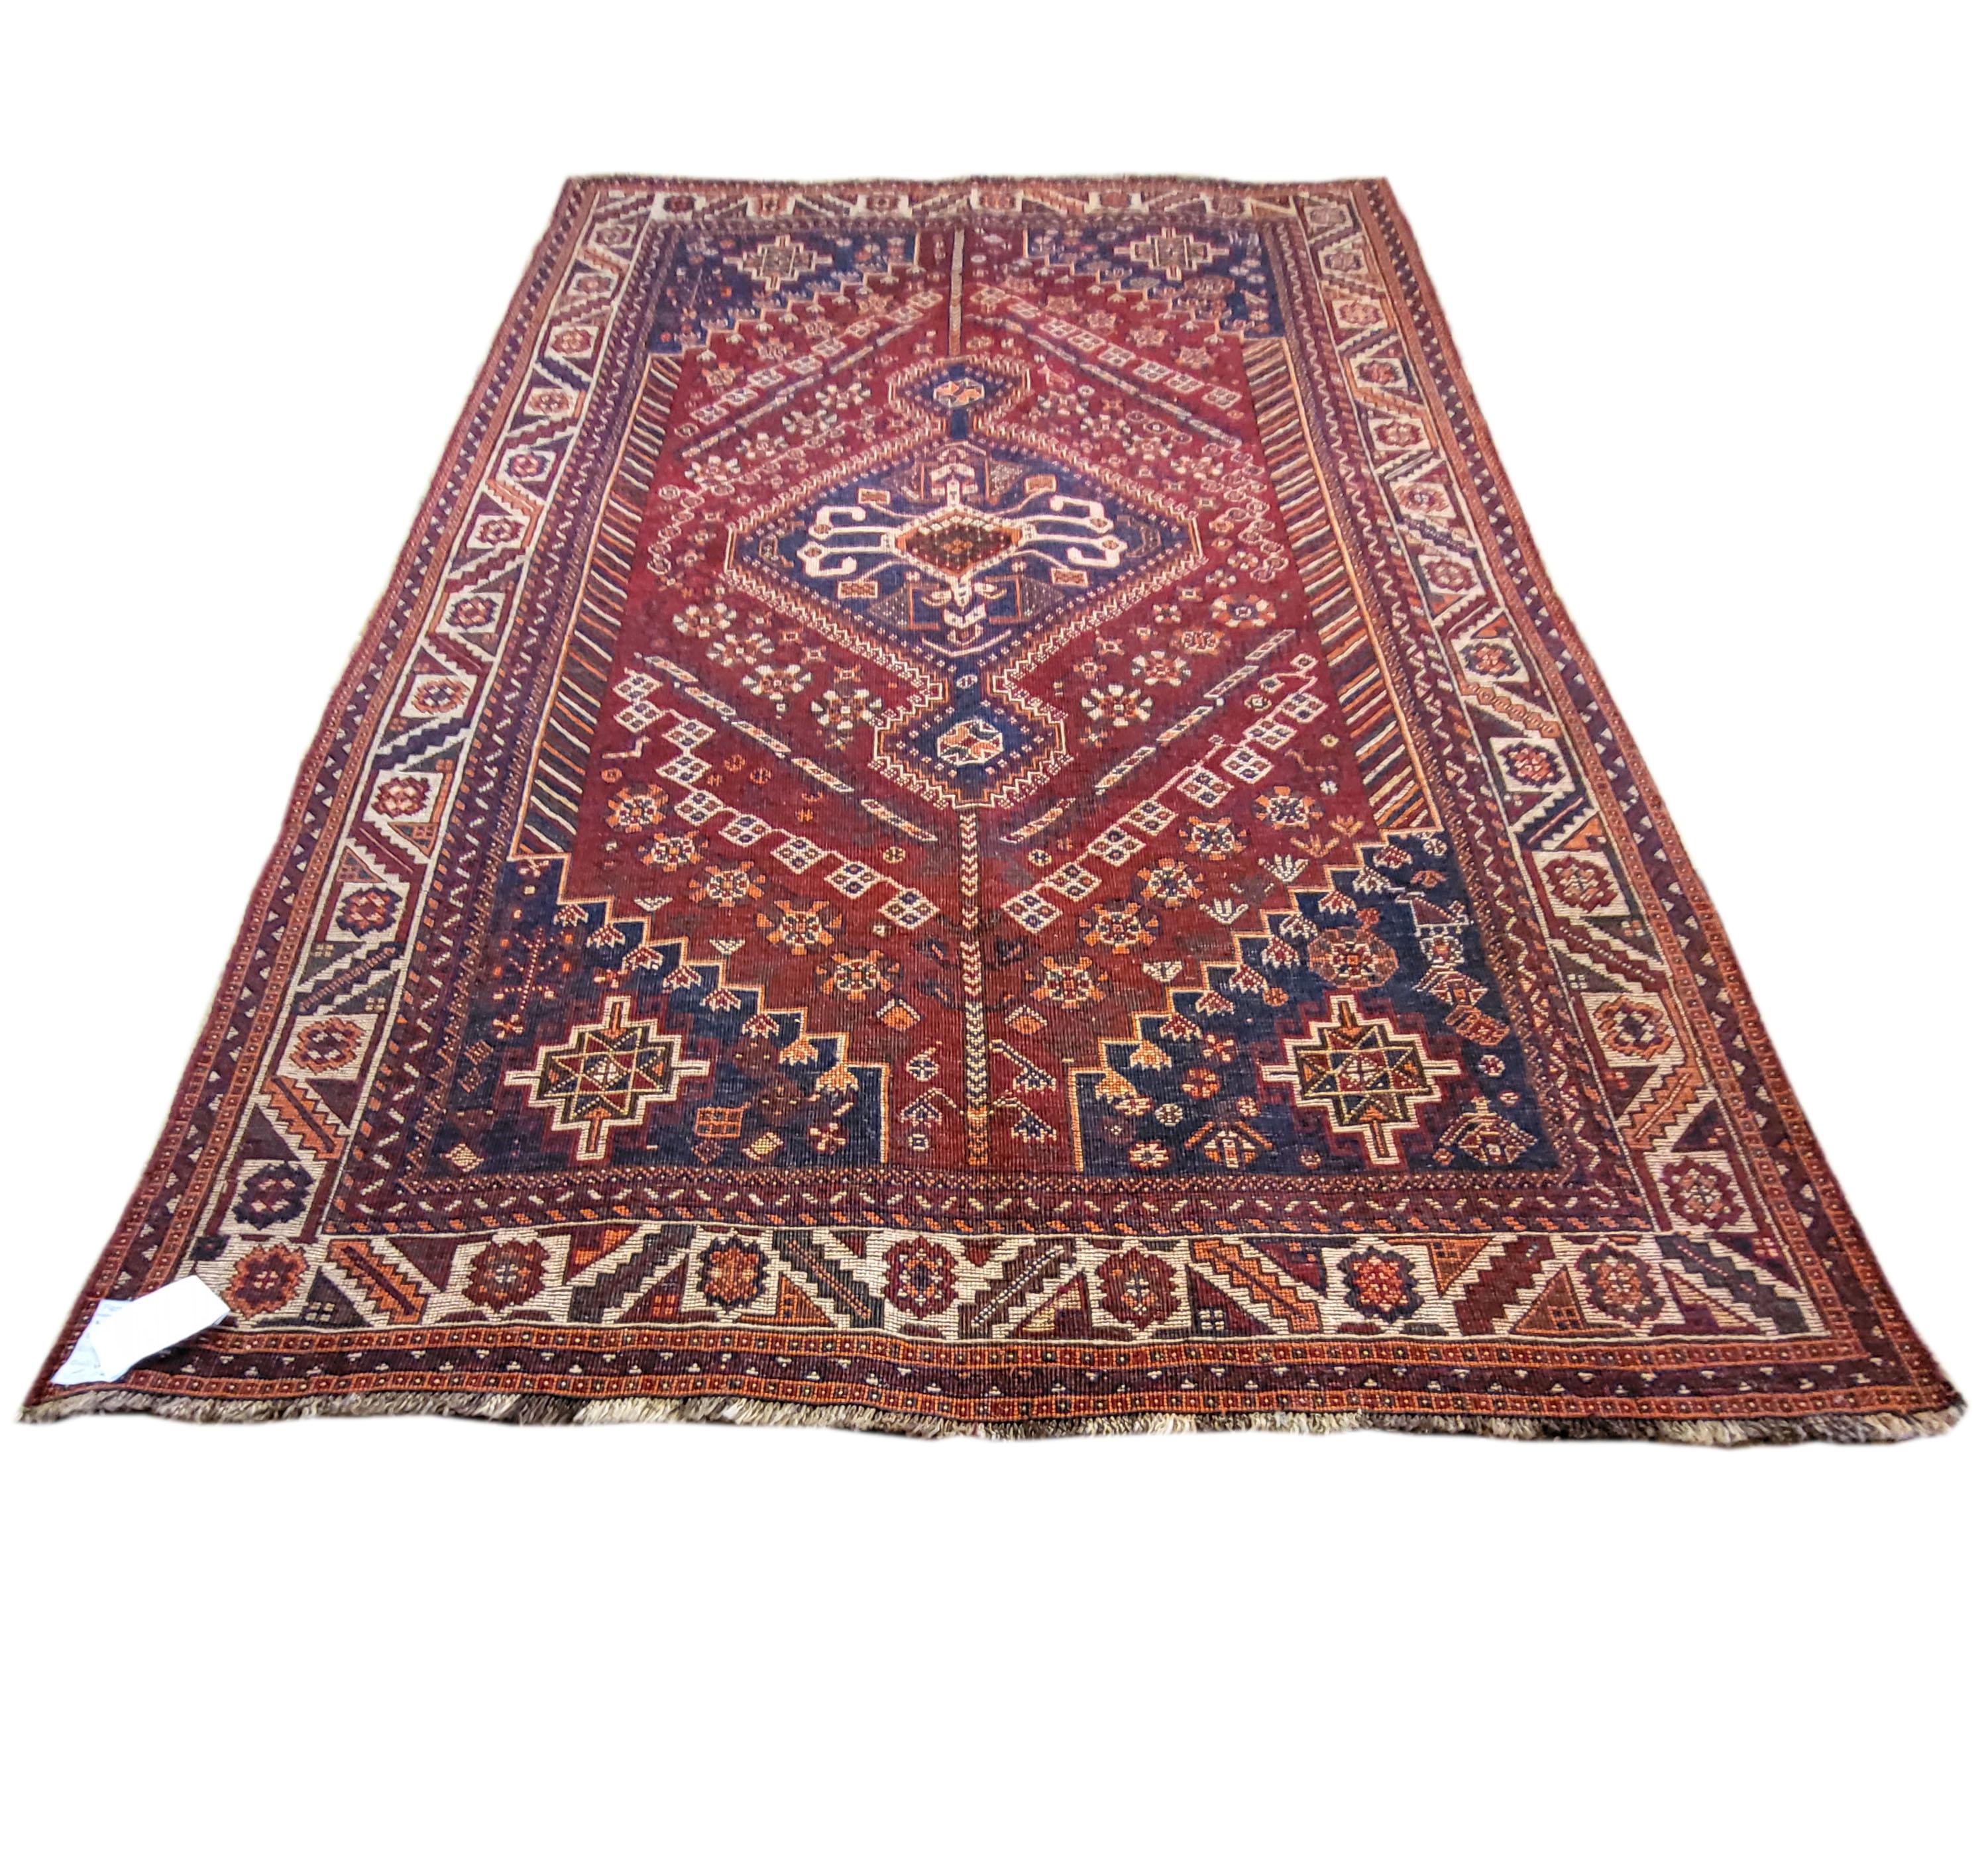 Gorgeous 100% wool tribal rug. Woven by a subtribe of the Qashqais known as the Rahimis, the richness in heritage is matched by it's intricate design. This one of a kind piece is something to behold; full of motifs, patterns, and shimmering vibrant